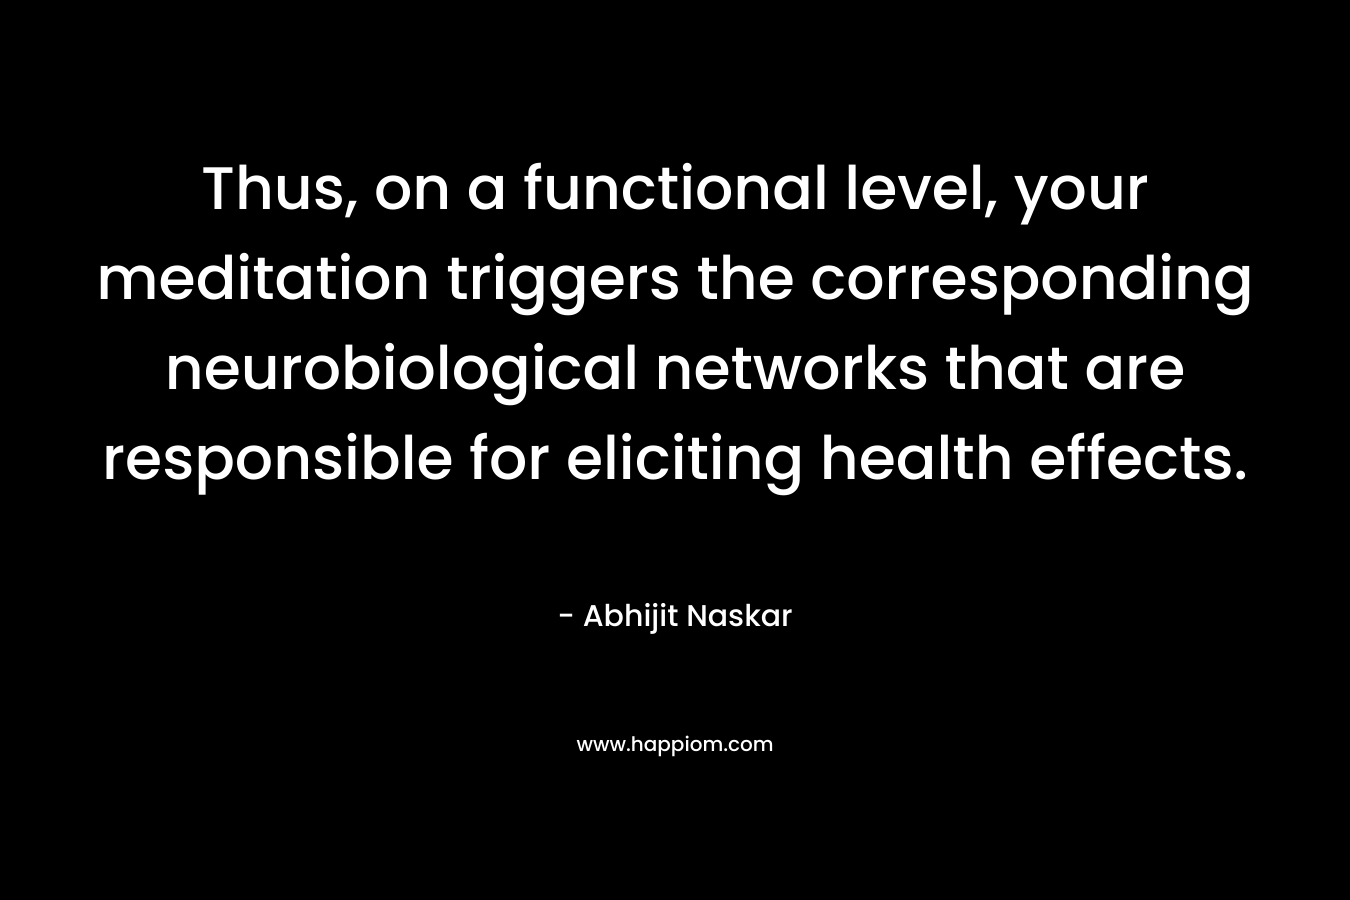 Thus, on a functional level, your meditation triggers the corresponding neurobiological networks that are responsible for eliciting health effects.